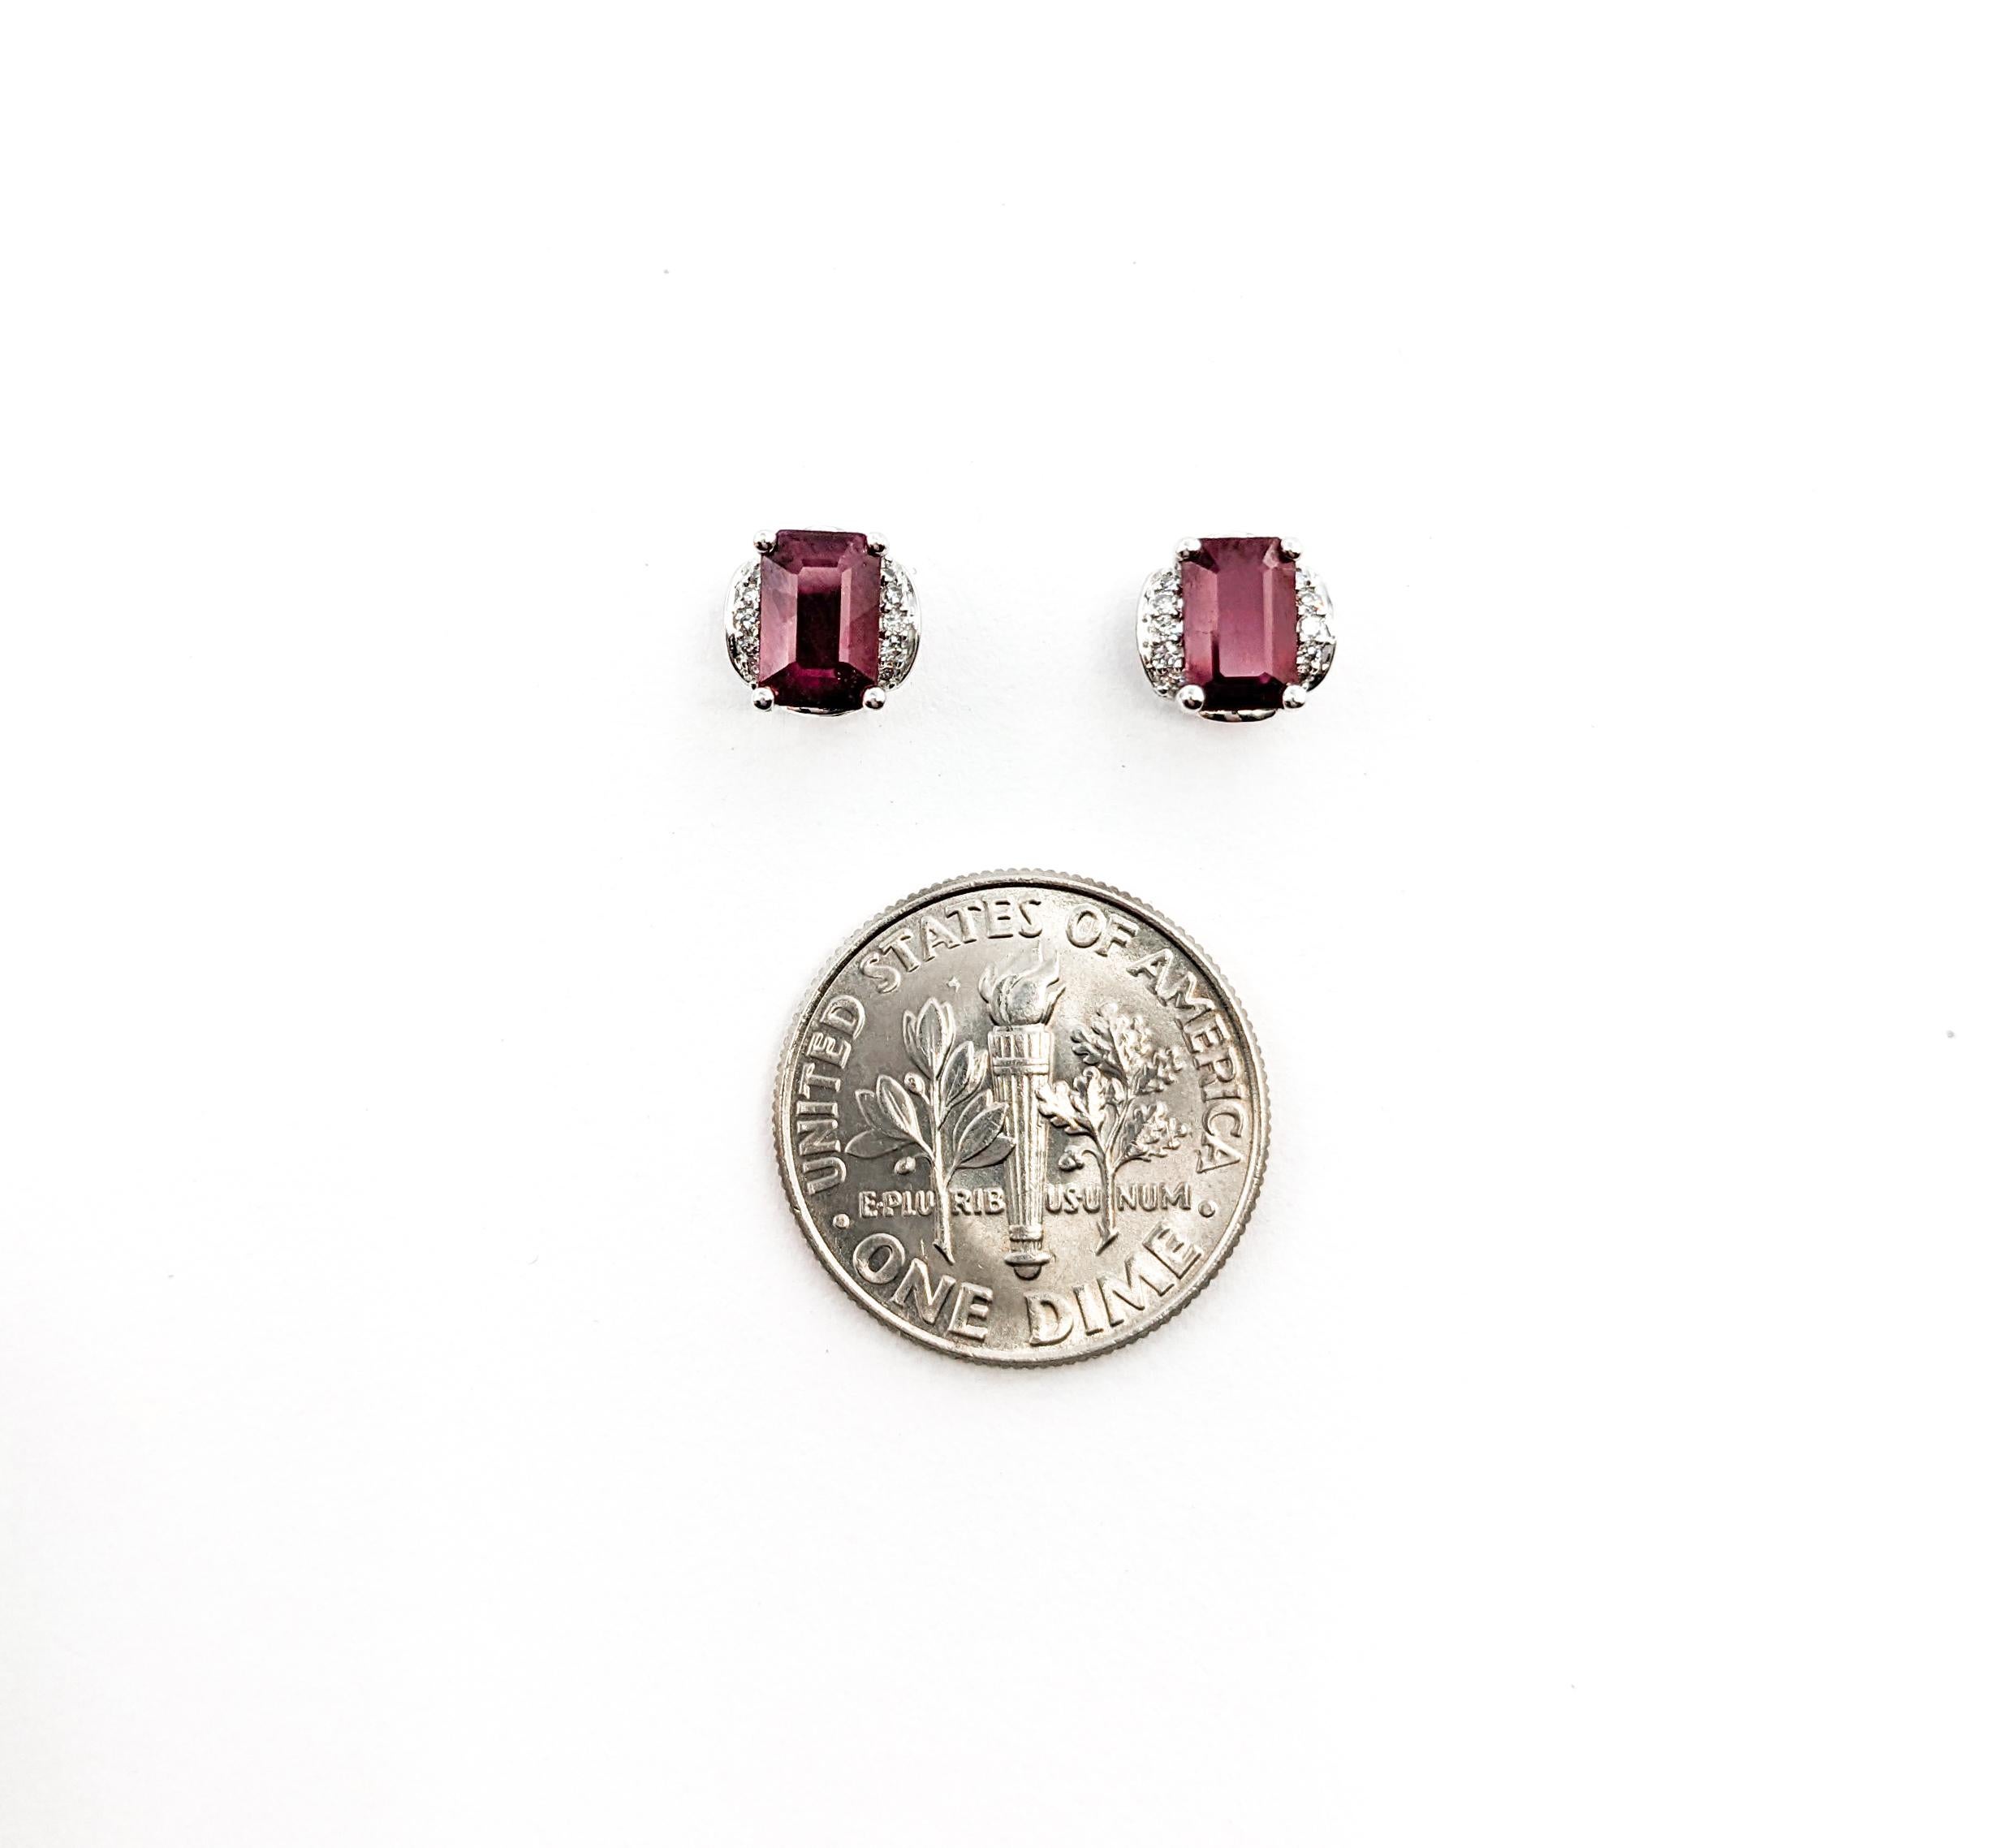 1.20ctw Rubies & Diamond Stud Earrings In White Gold


These exquisite earrings are masterfully crafted in 14kt white gold, featuring 0.06ctw diamonds with SI clarity and a near colorless hue, beautifully complementing 1.20ctw rubies. Each earring